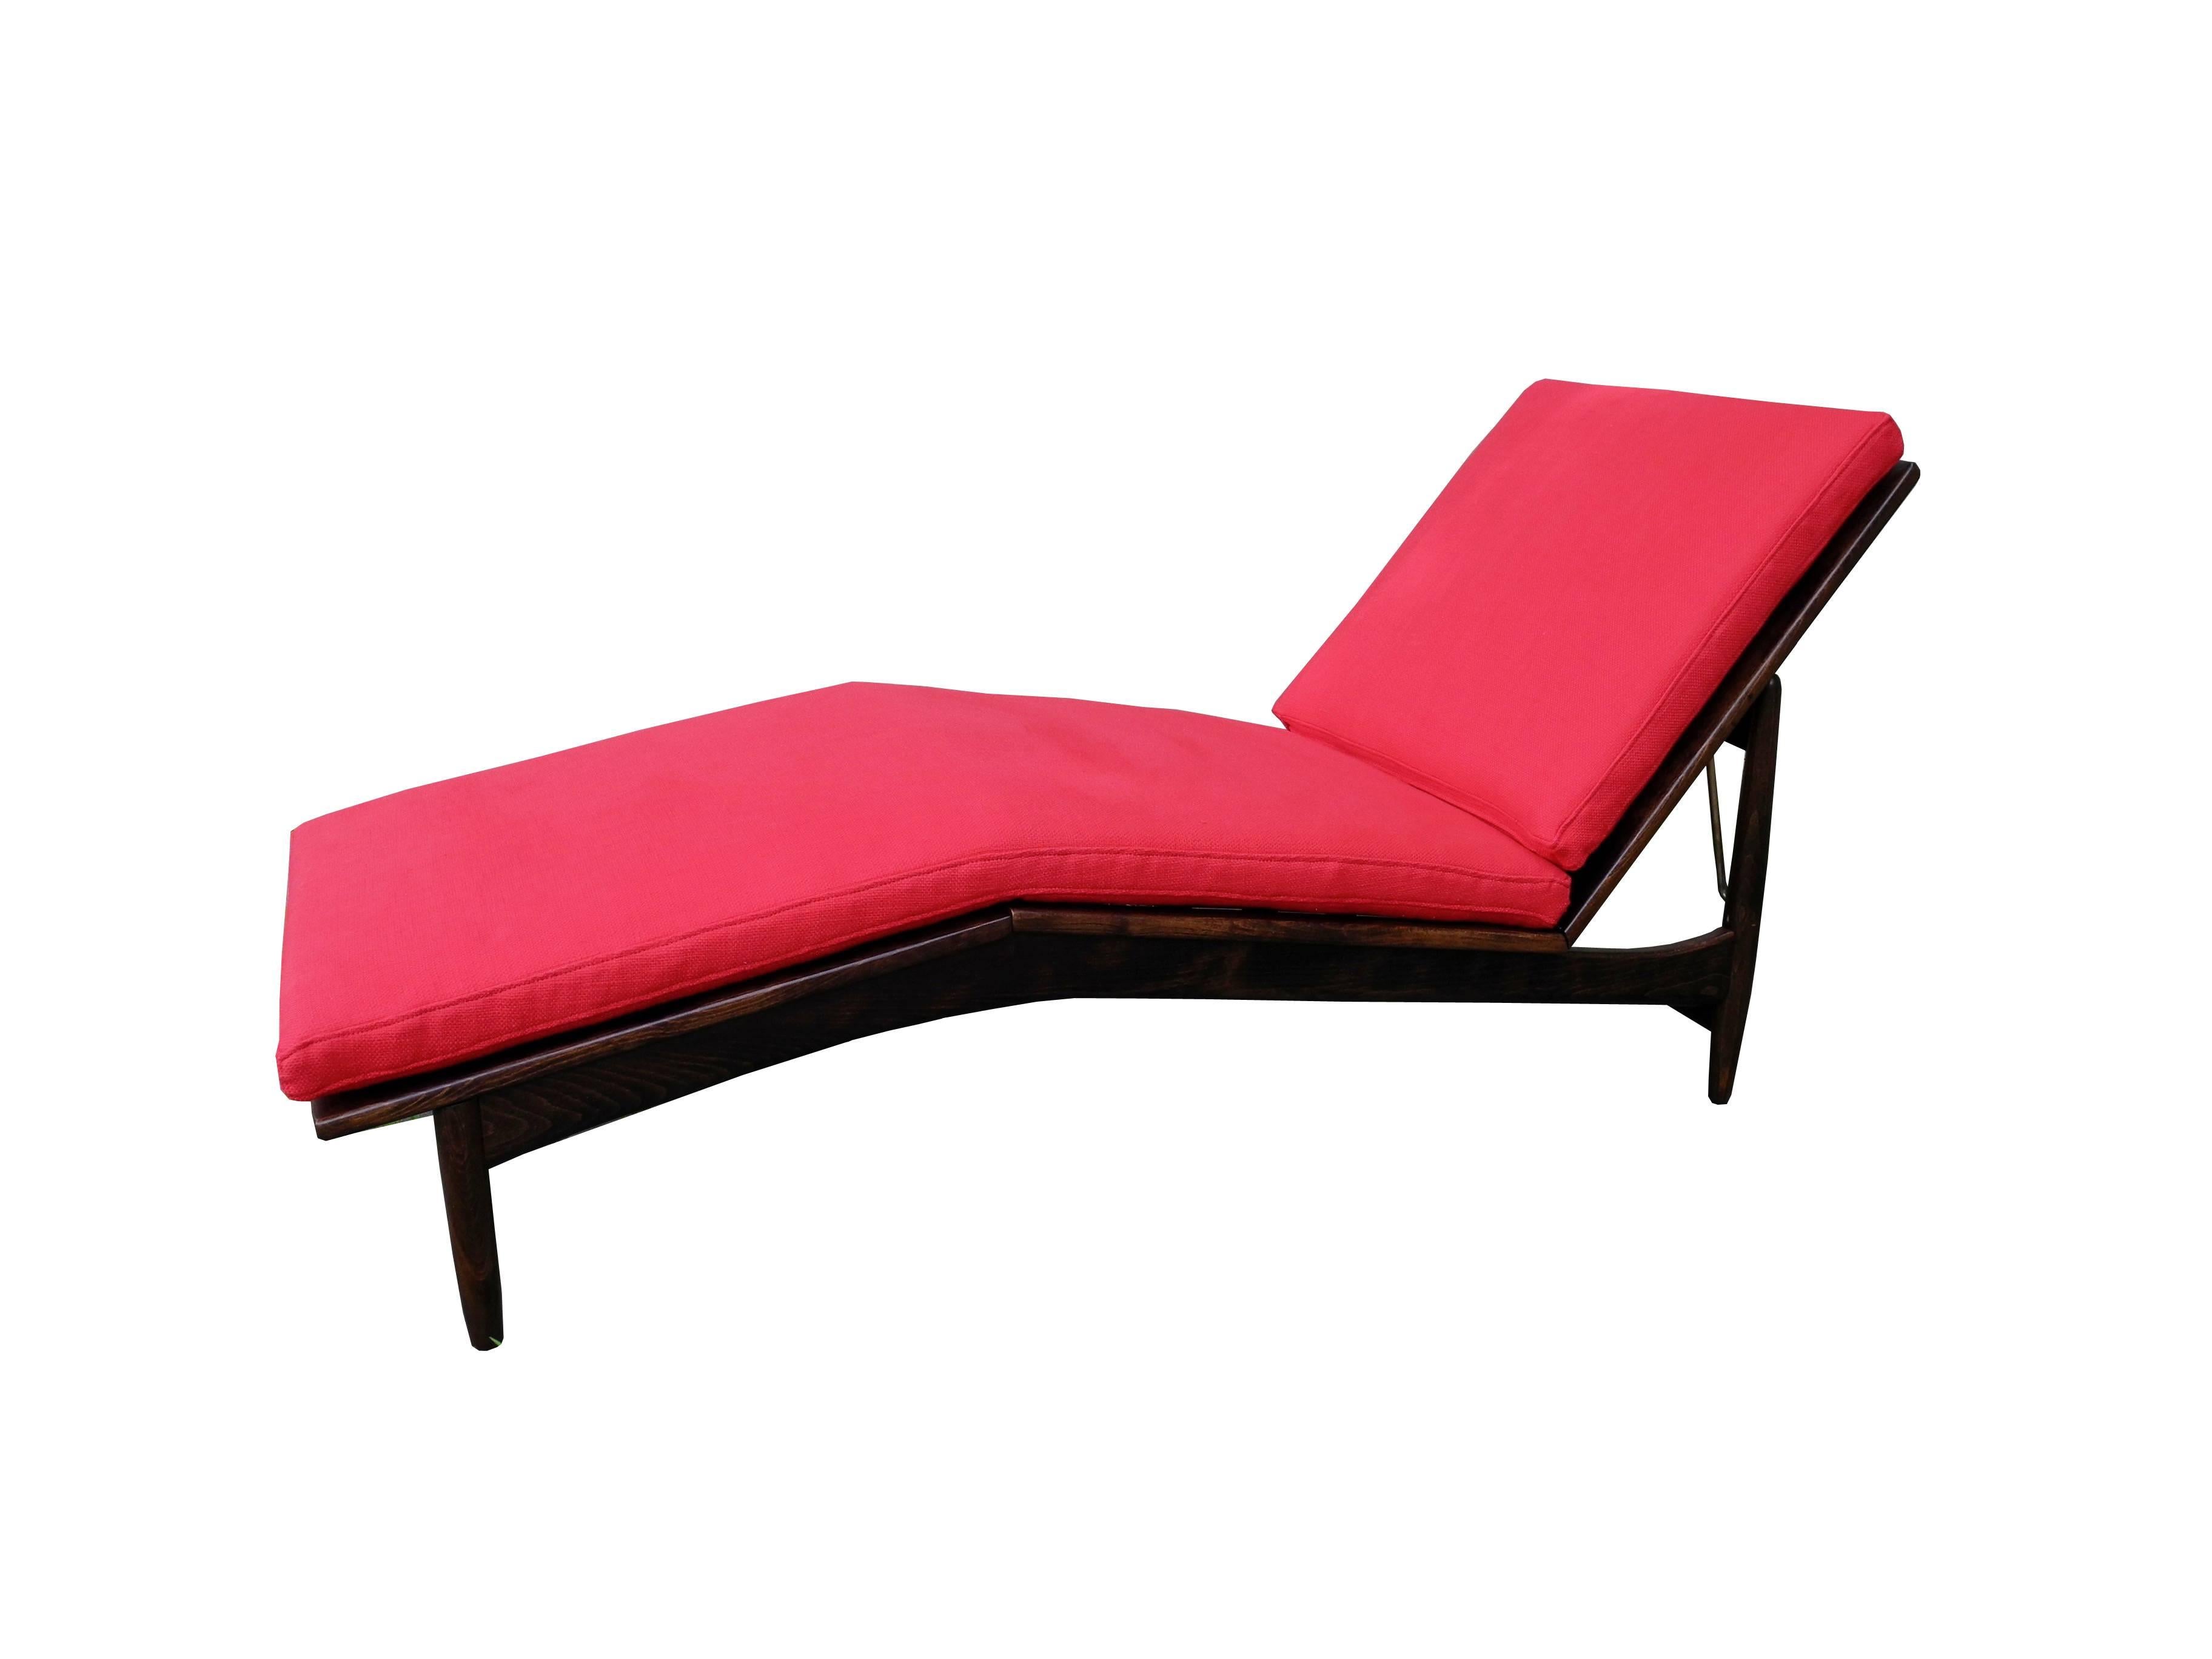 This beautifully designed Danish modern chaise longue with three adjustable angles is by Ib Kofod-Larsen for Selig. Vintage, yet refinished and reupholstered with a new cushion in a red cotton weave fabric.